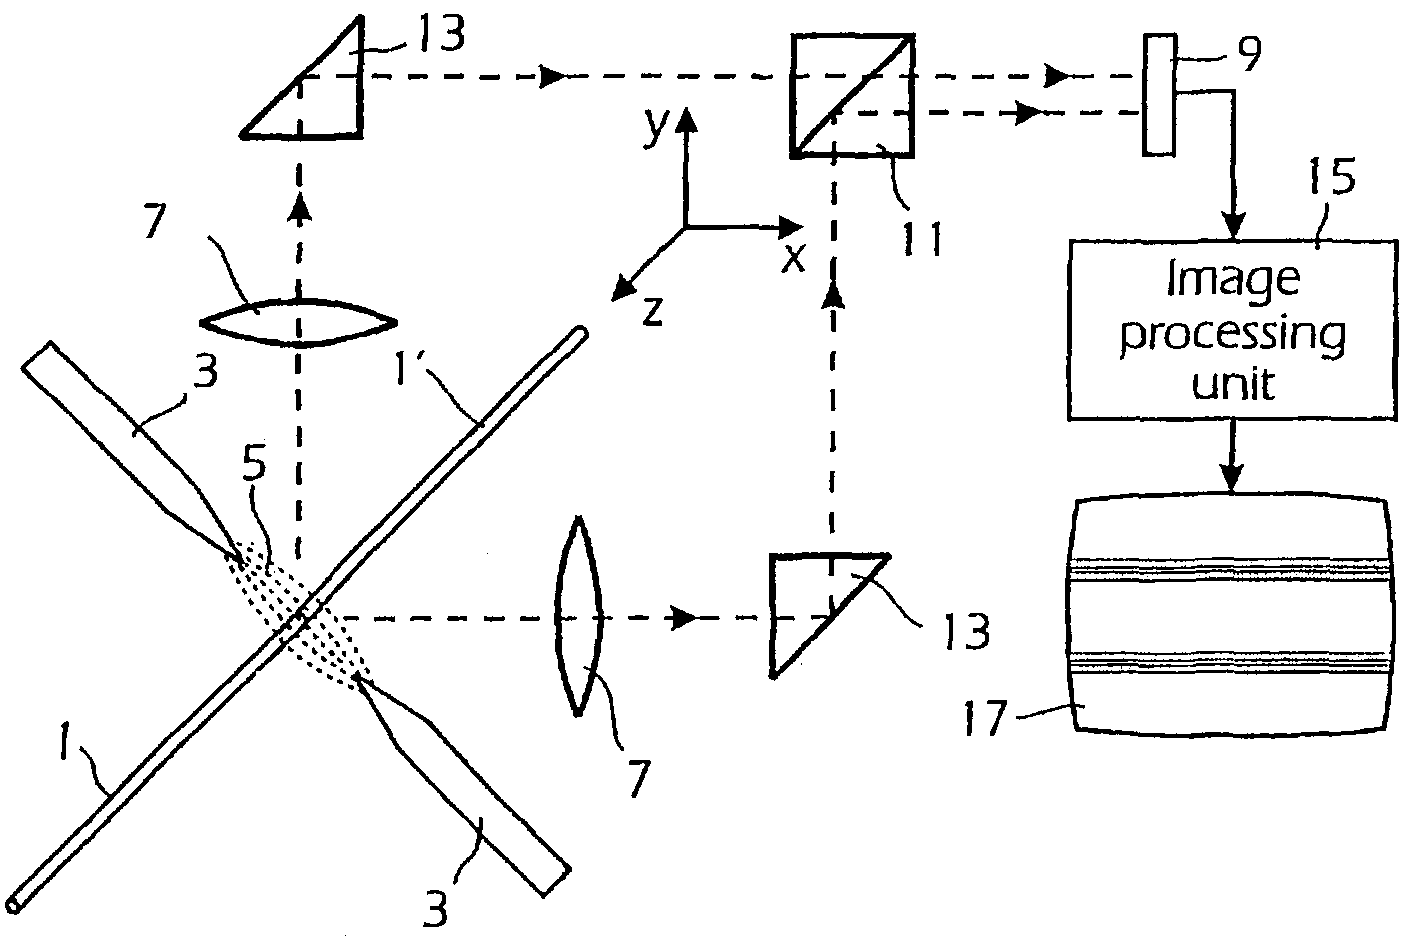 Method of splicing optical fibers with arc imagining and recentering